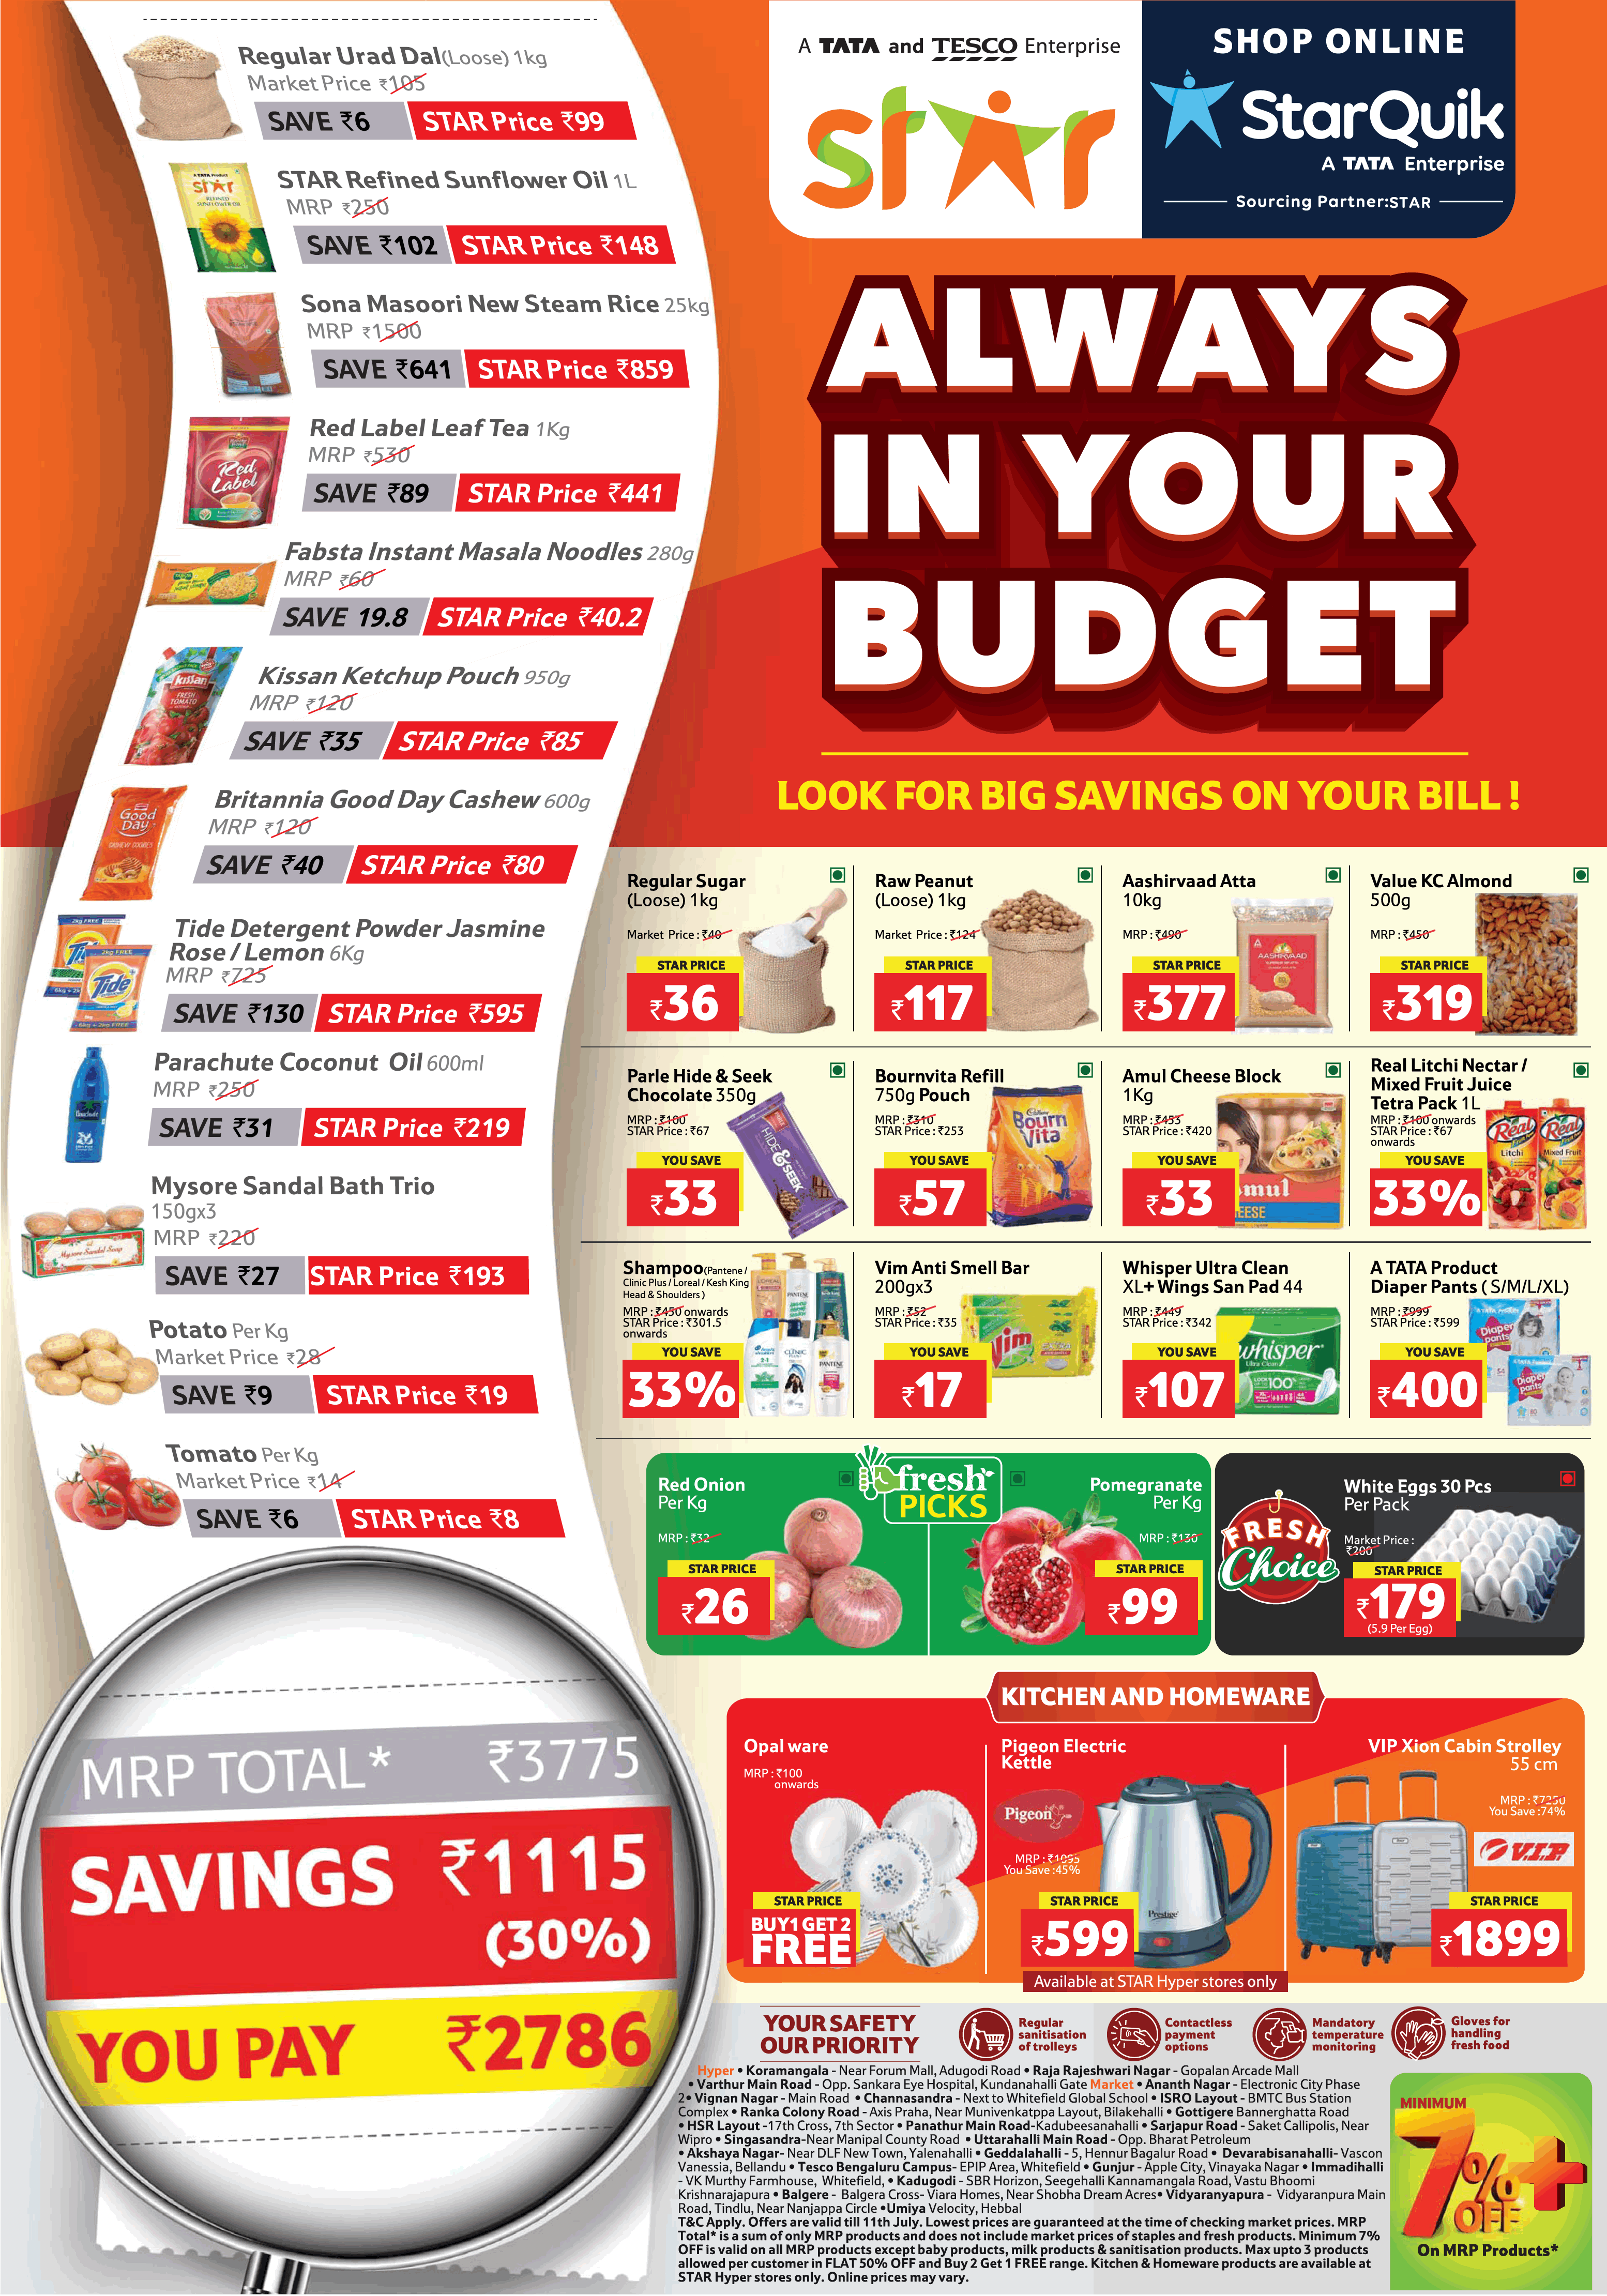 star-hypermarket-always-in-your-budget-star-quik-shop-online-ad-times-of-india-bangalore-10-7-2021